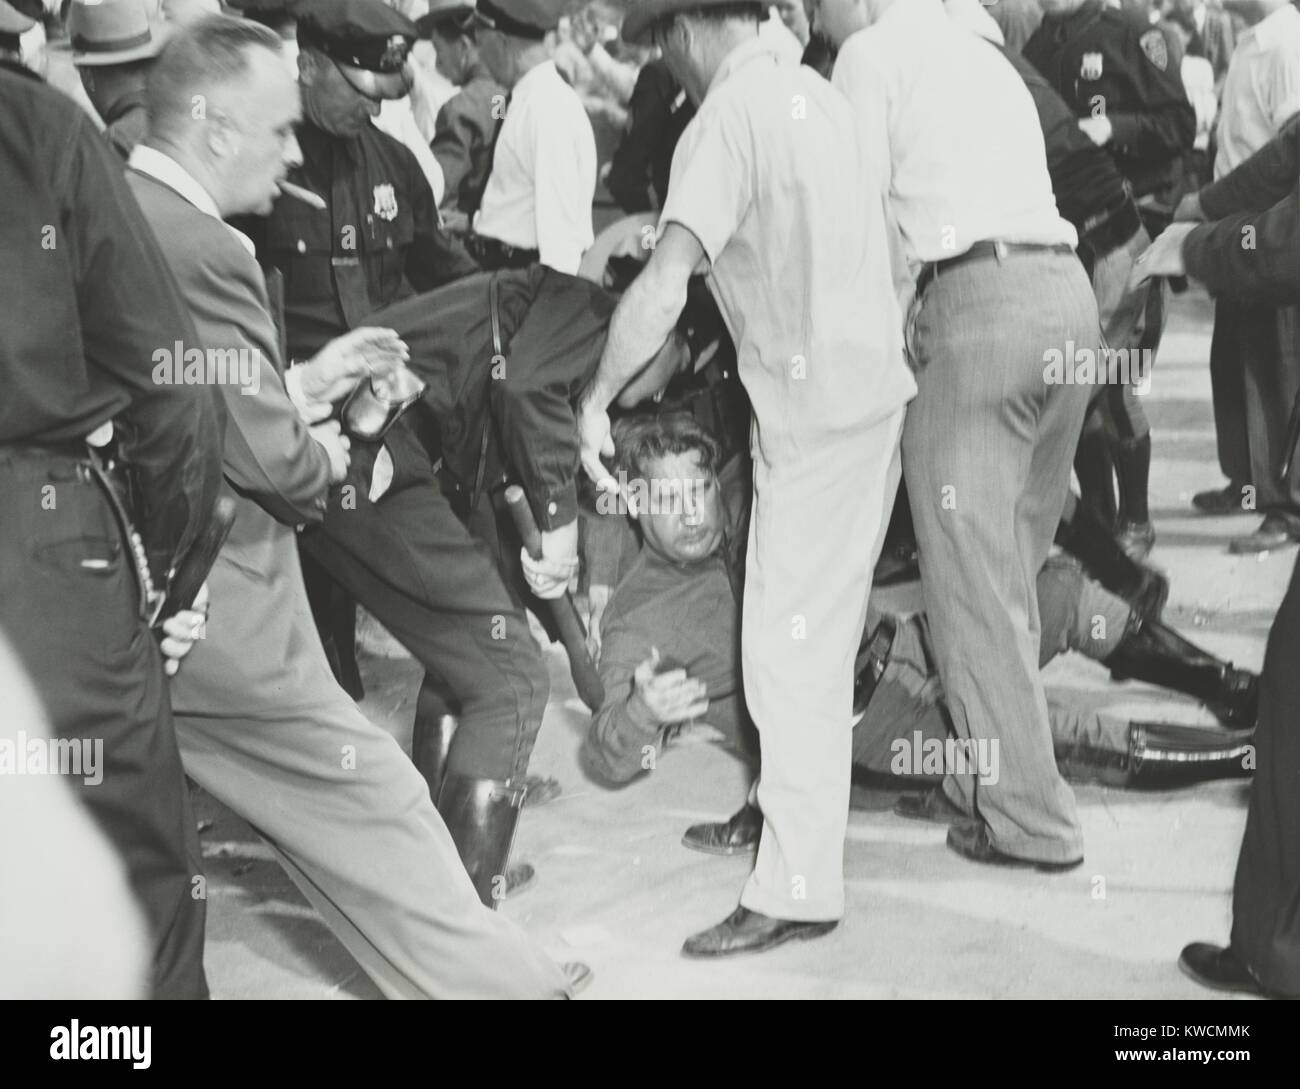 State trooper on the ground after he was hit by a rioter's rock during the Paul Robeson concert. Peekskill, N.Y. Sept. 4, 1949. An earlier August 27th concert was canceled when a mob attacked concert-goers, seriously injuring 13 with baseball bats and rocks. The concert benefited the Civil Rights Congress. (BSLOC 2014 13 68) Stock Photo